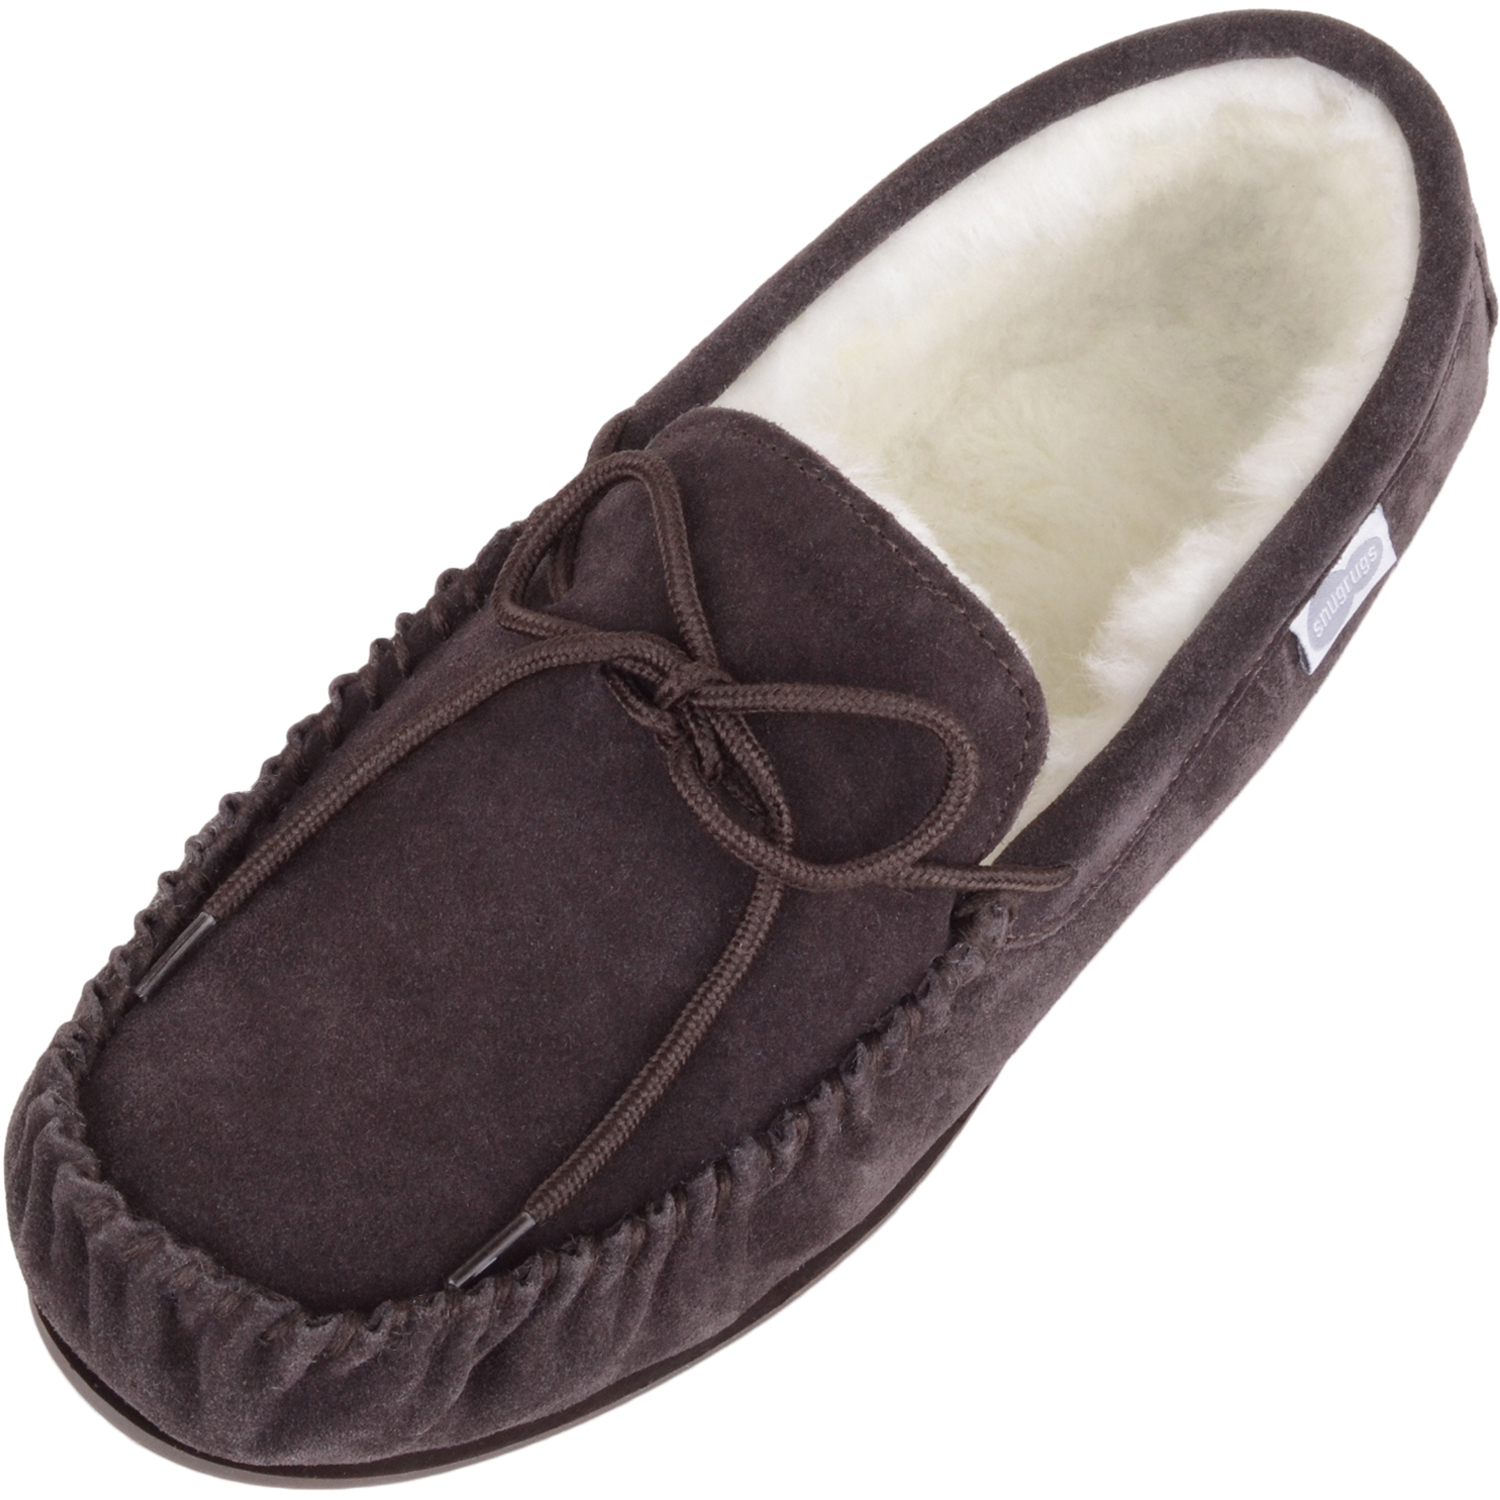 Snugrugs - Wool Lined Suede Moccasins Rubber Sole - Dark Brown